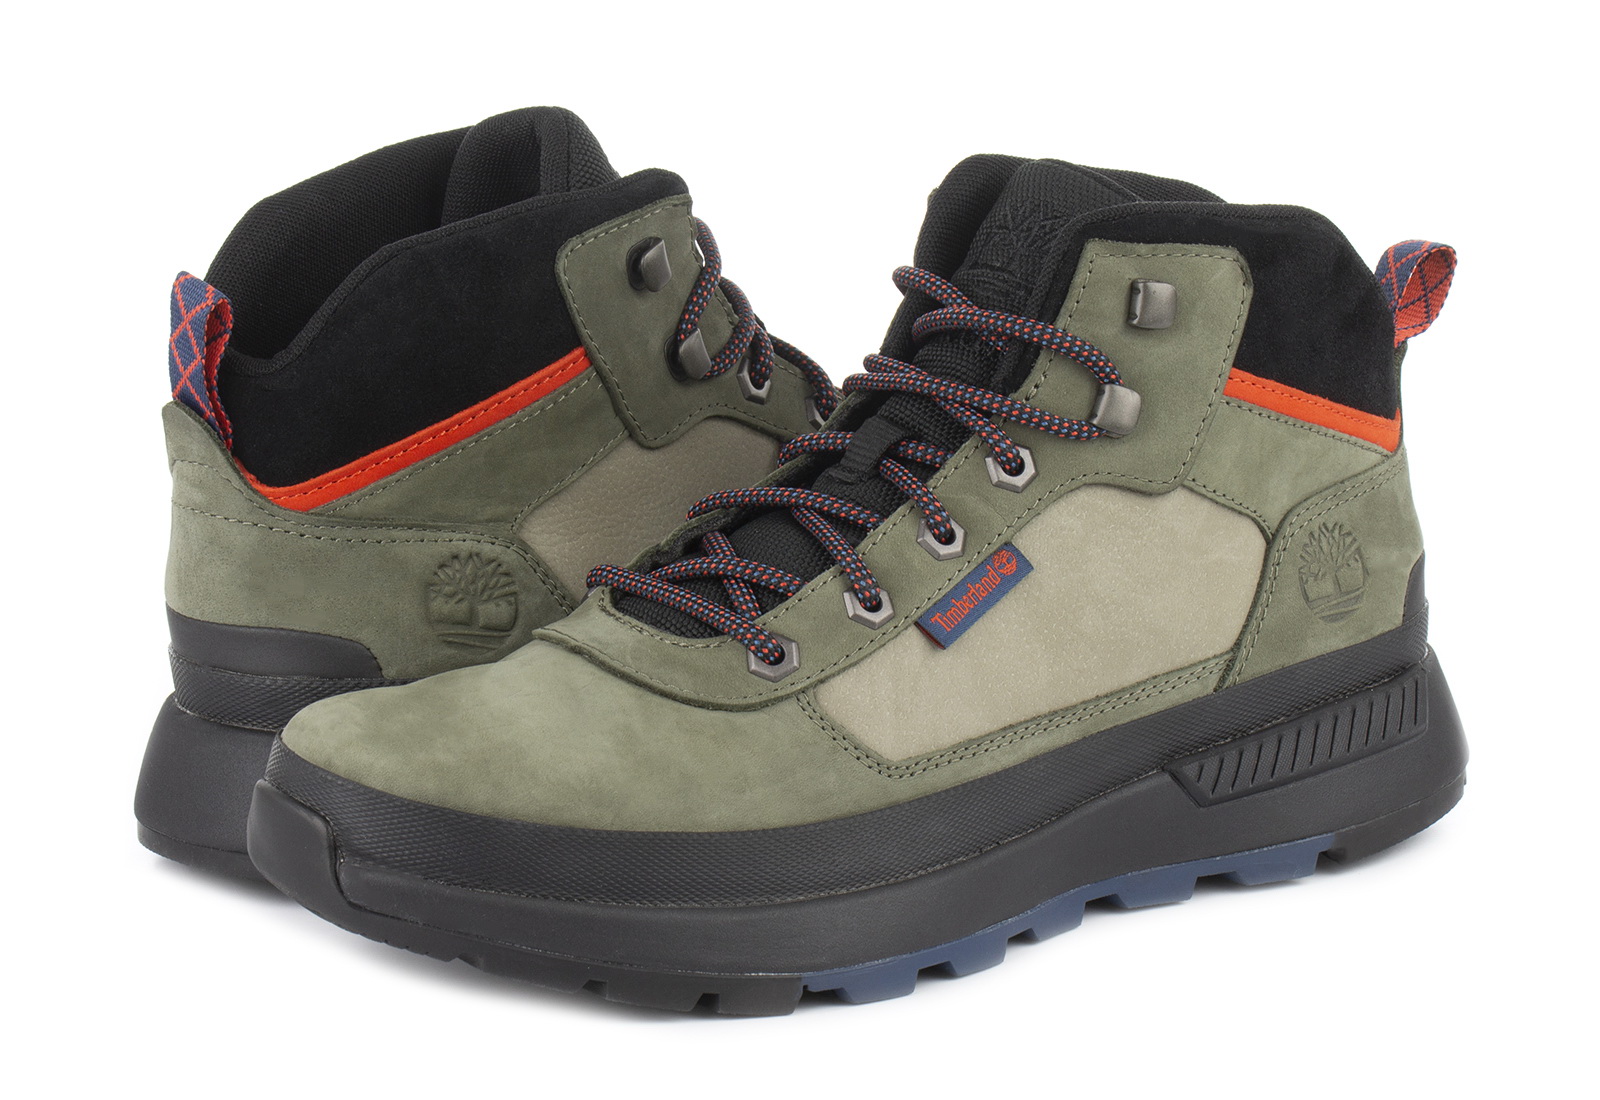 Timberland Hikers - Field Trekker Mid - A2DHM-olv - Online shop for  sneakers, shoes and boots